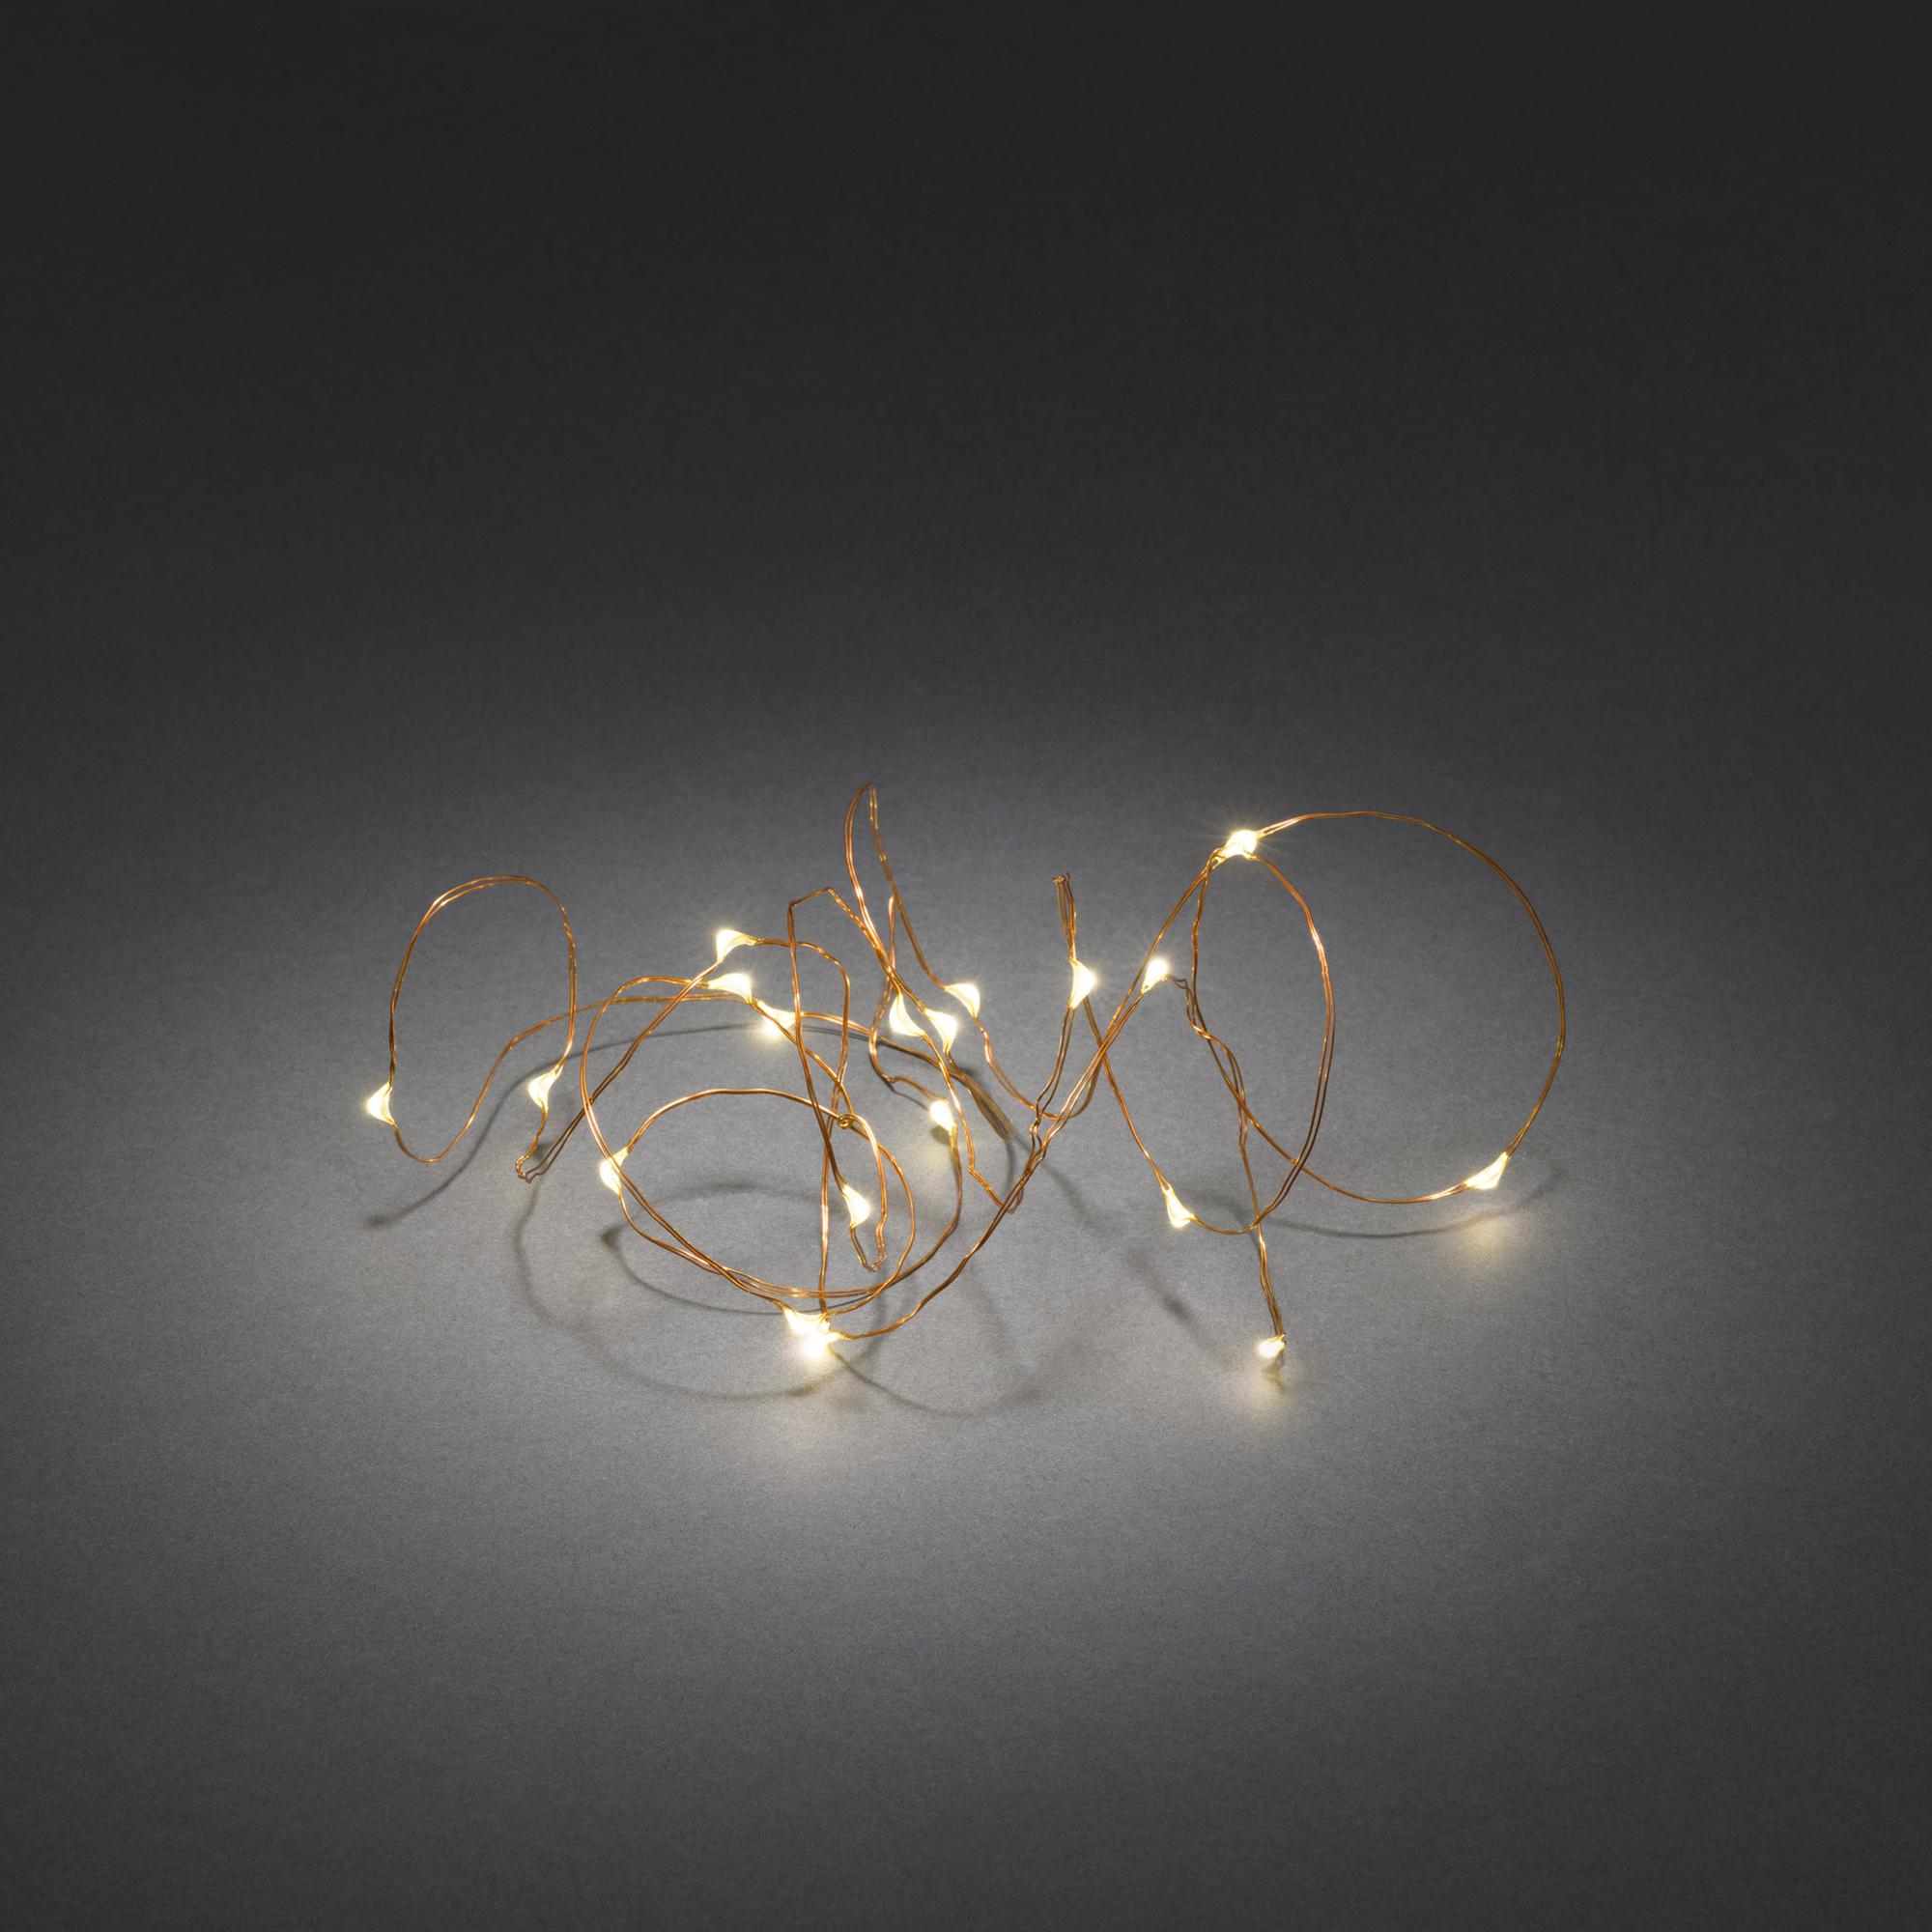 LED Micro Light Chain warm white, 4.4m (40 LEDs), 6h timer, Battery Operated, copper